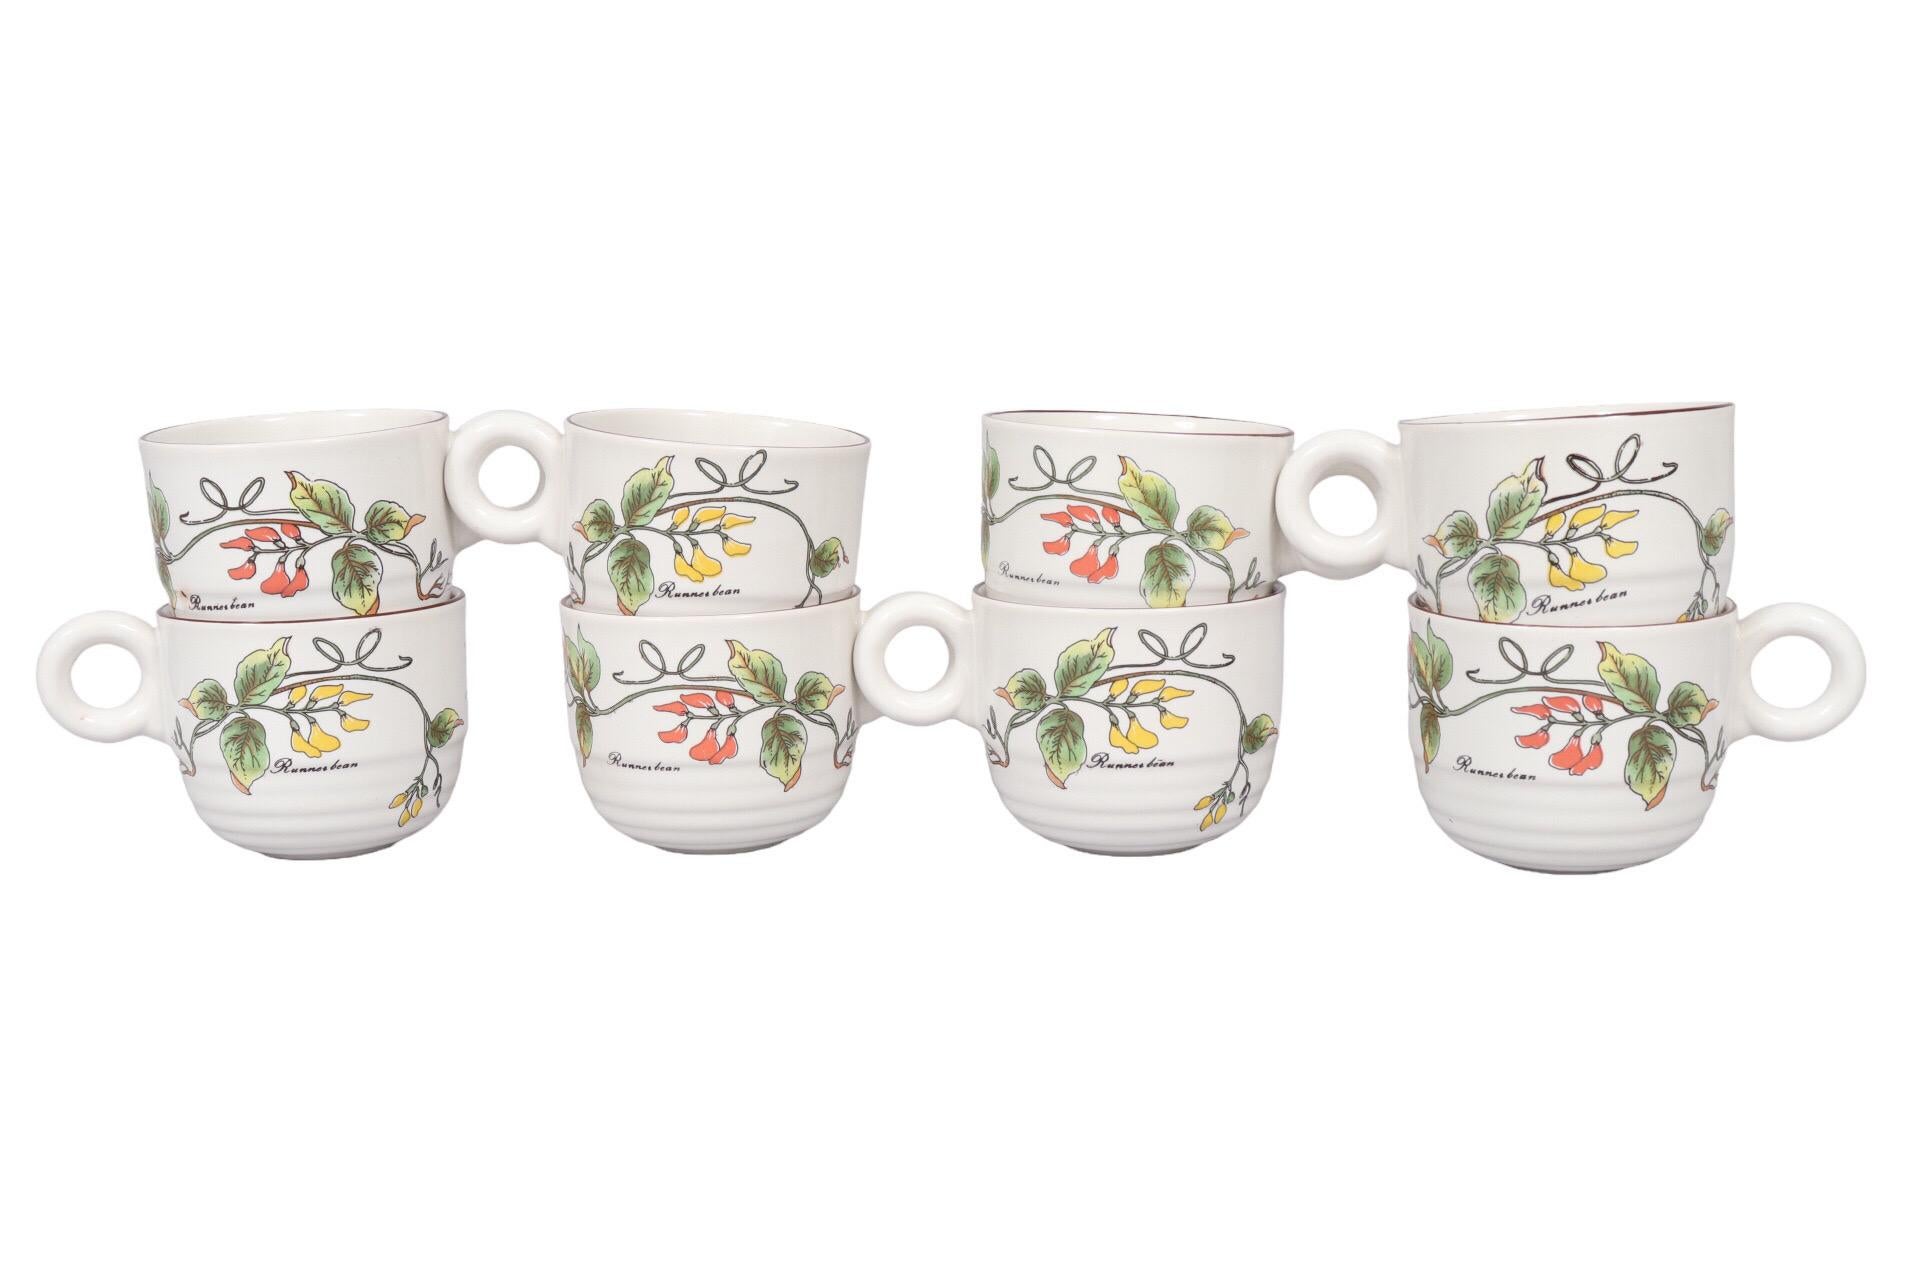 A set of eight ceramic coffee or tea cups. Decorated on each side with trailing runner bean vines flowering in red and yellow, the words “runner bean” below in cursive script. Cups have small round handles and undulating beveled bases. Marked